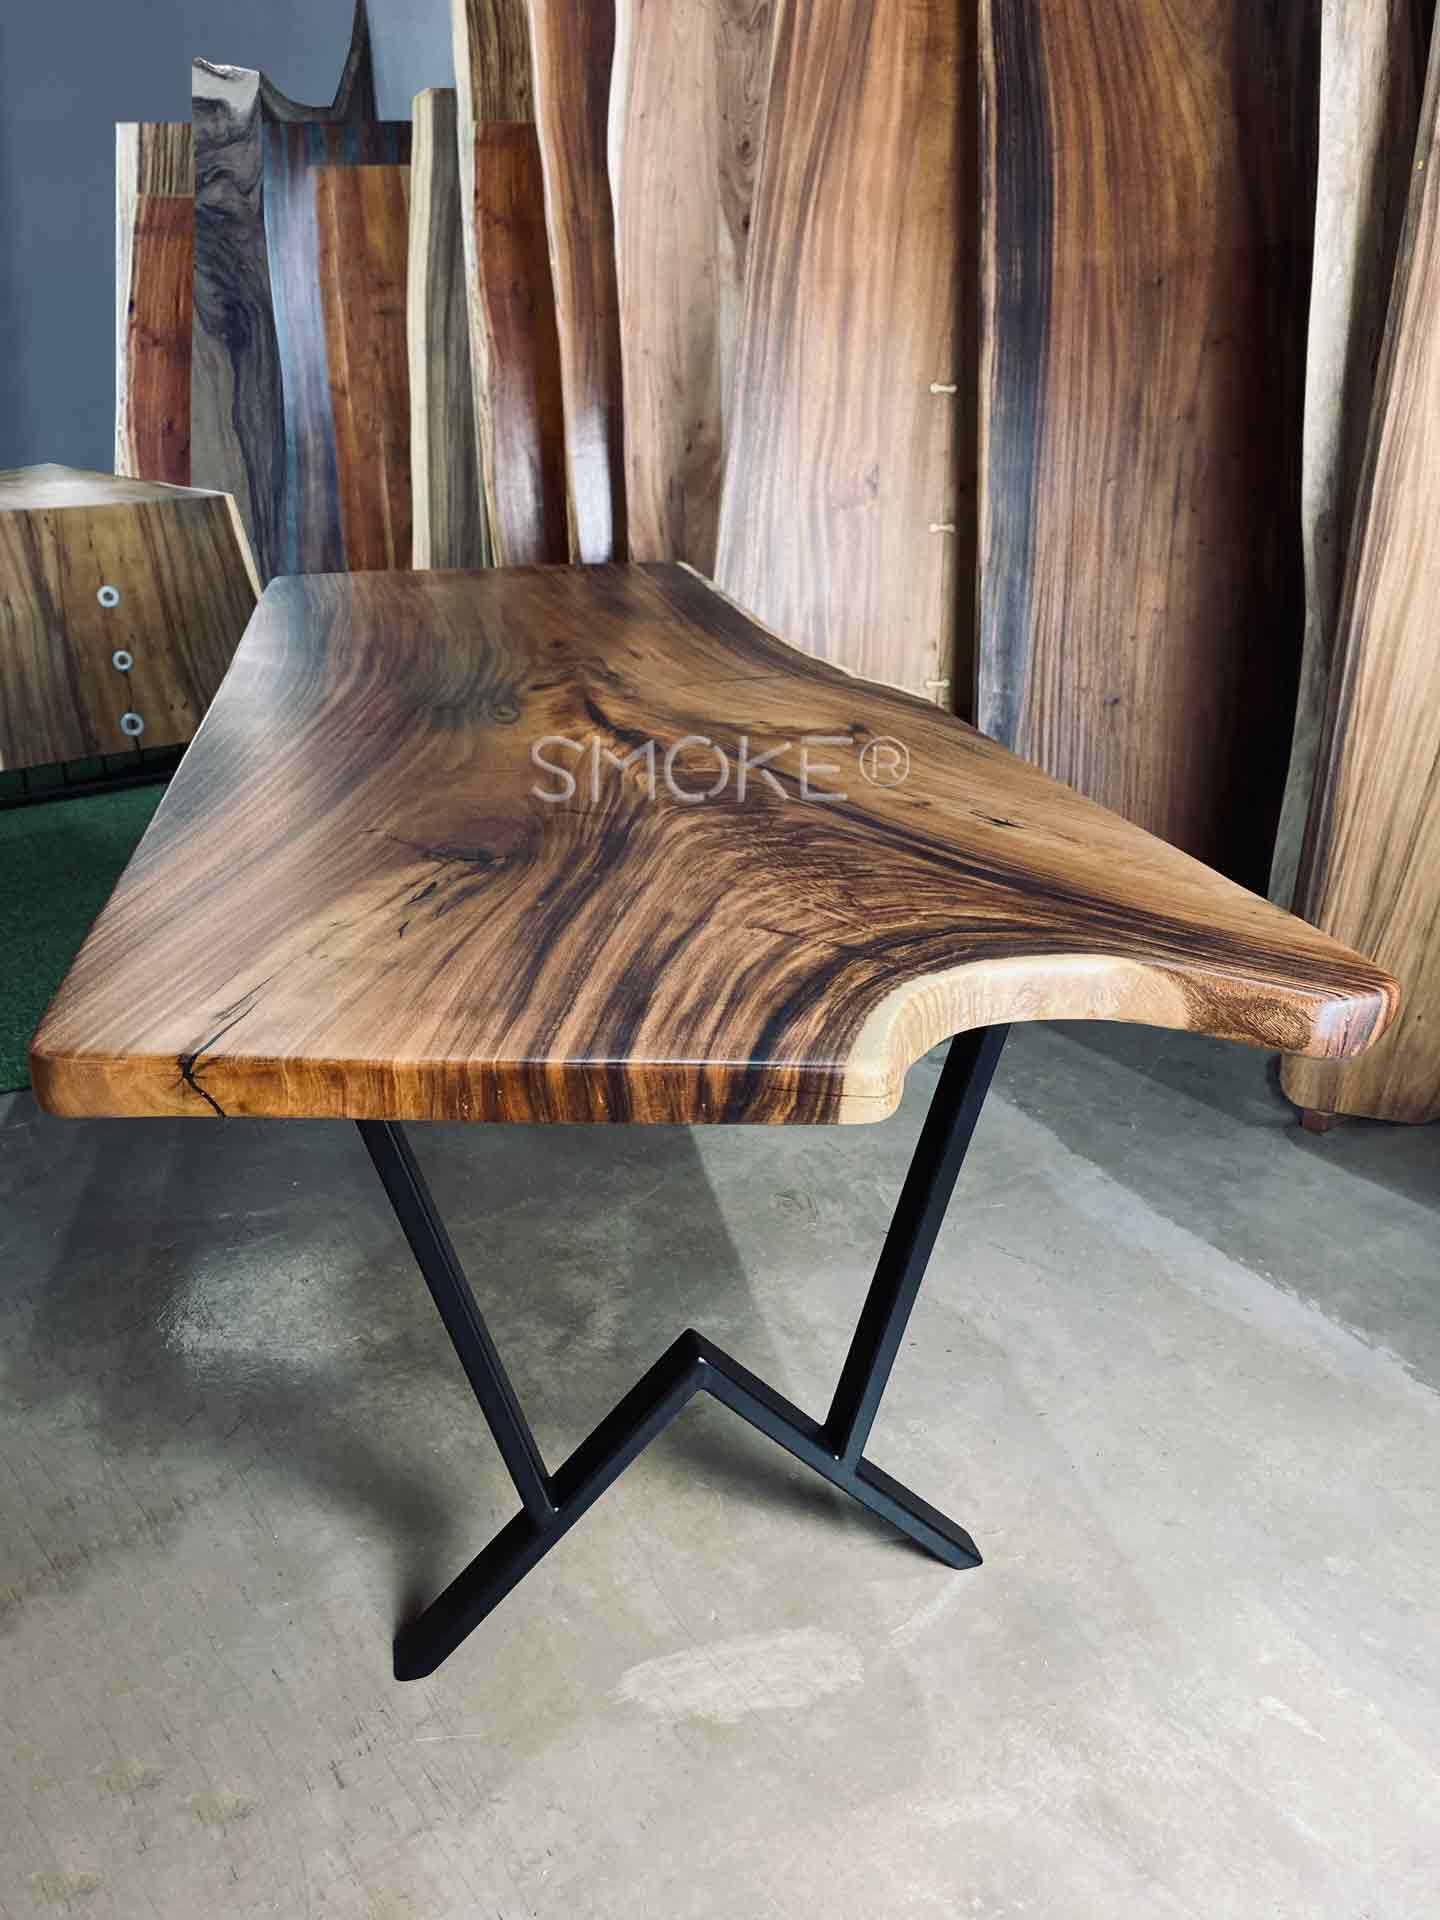 handcrafted customize live edge dining table